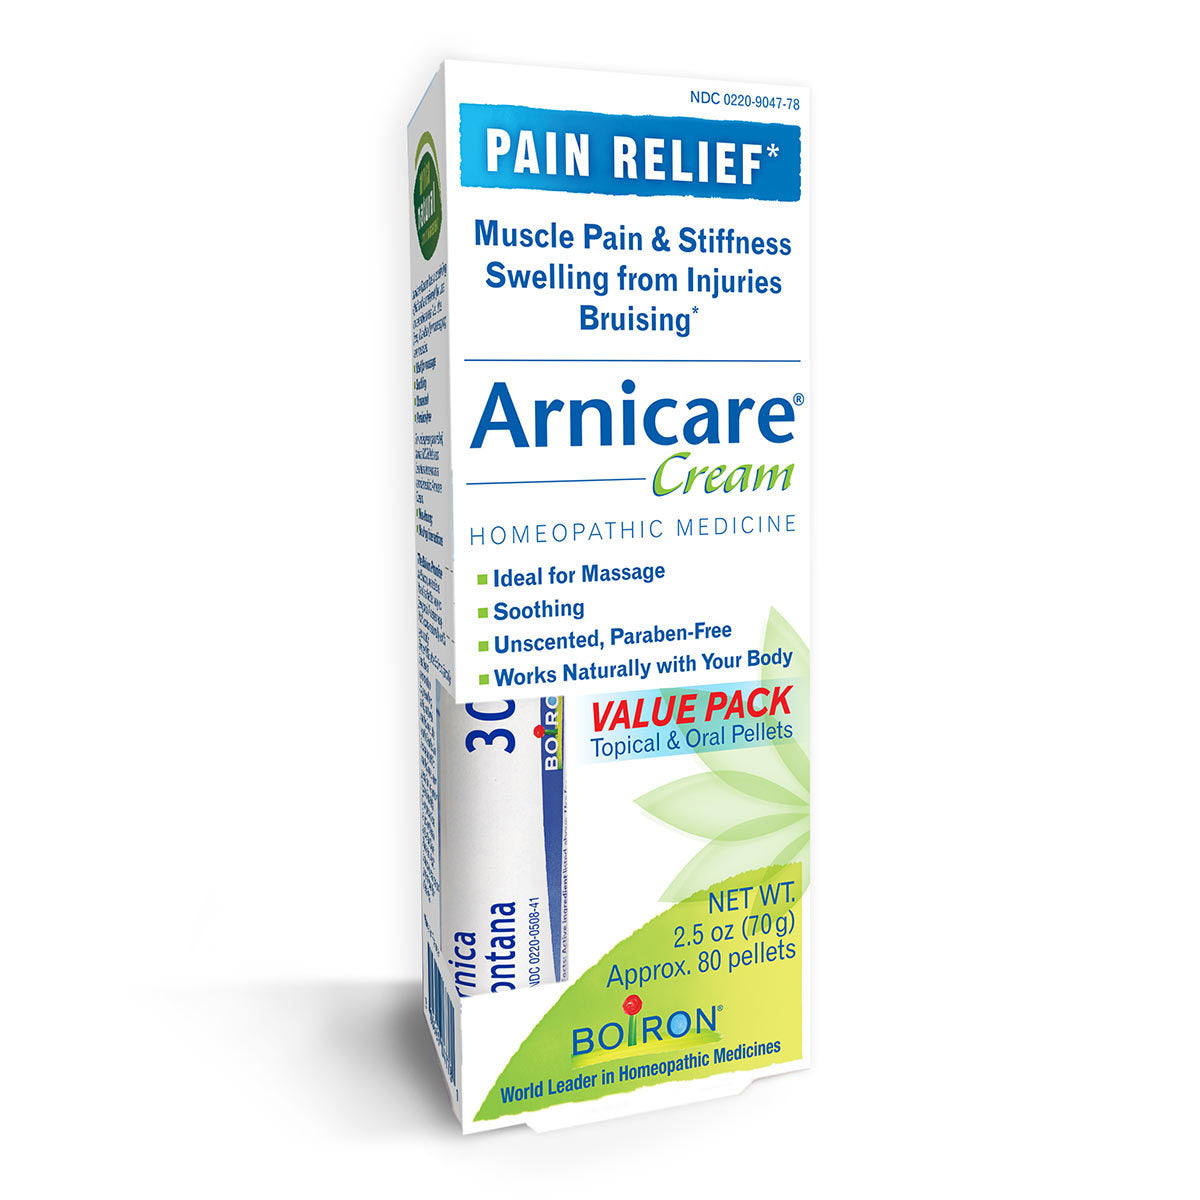 Primary image of Arnicare Cream and Blue Tube Value Pack